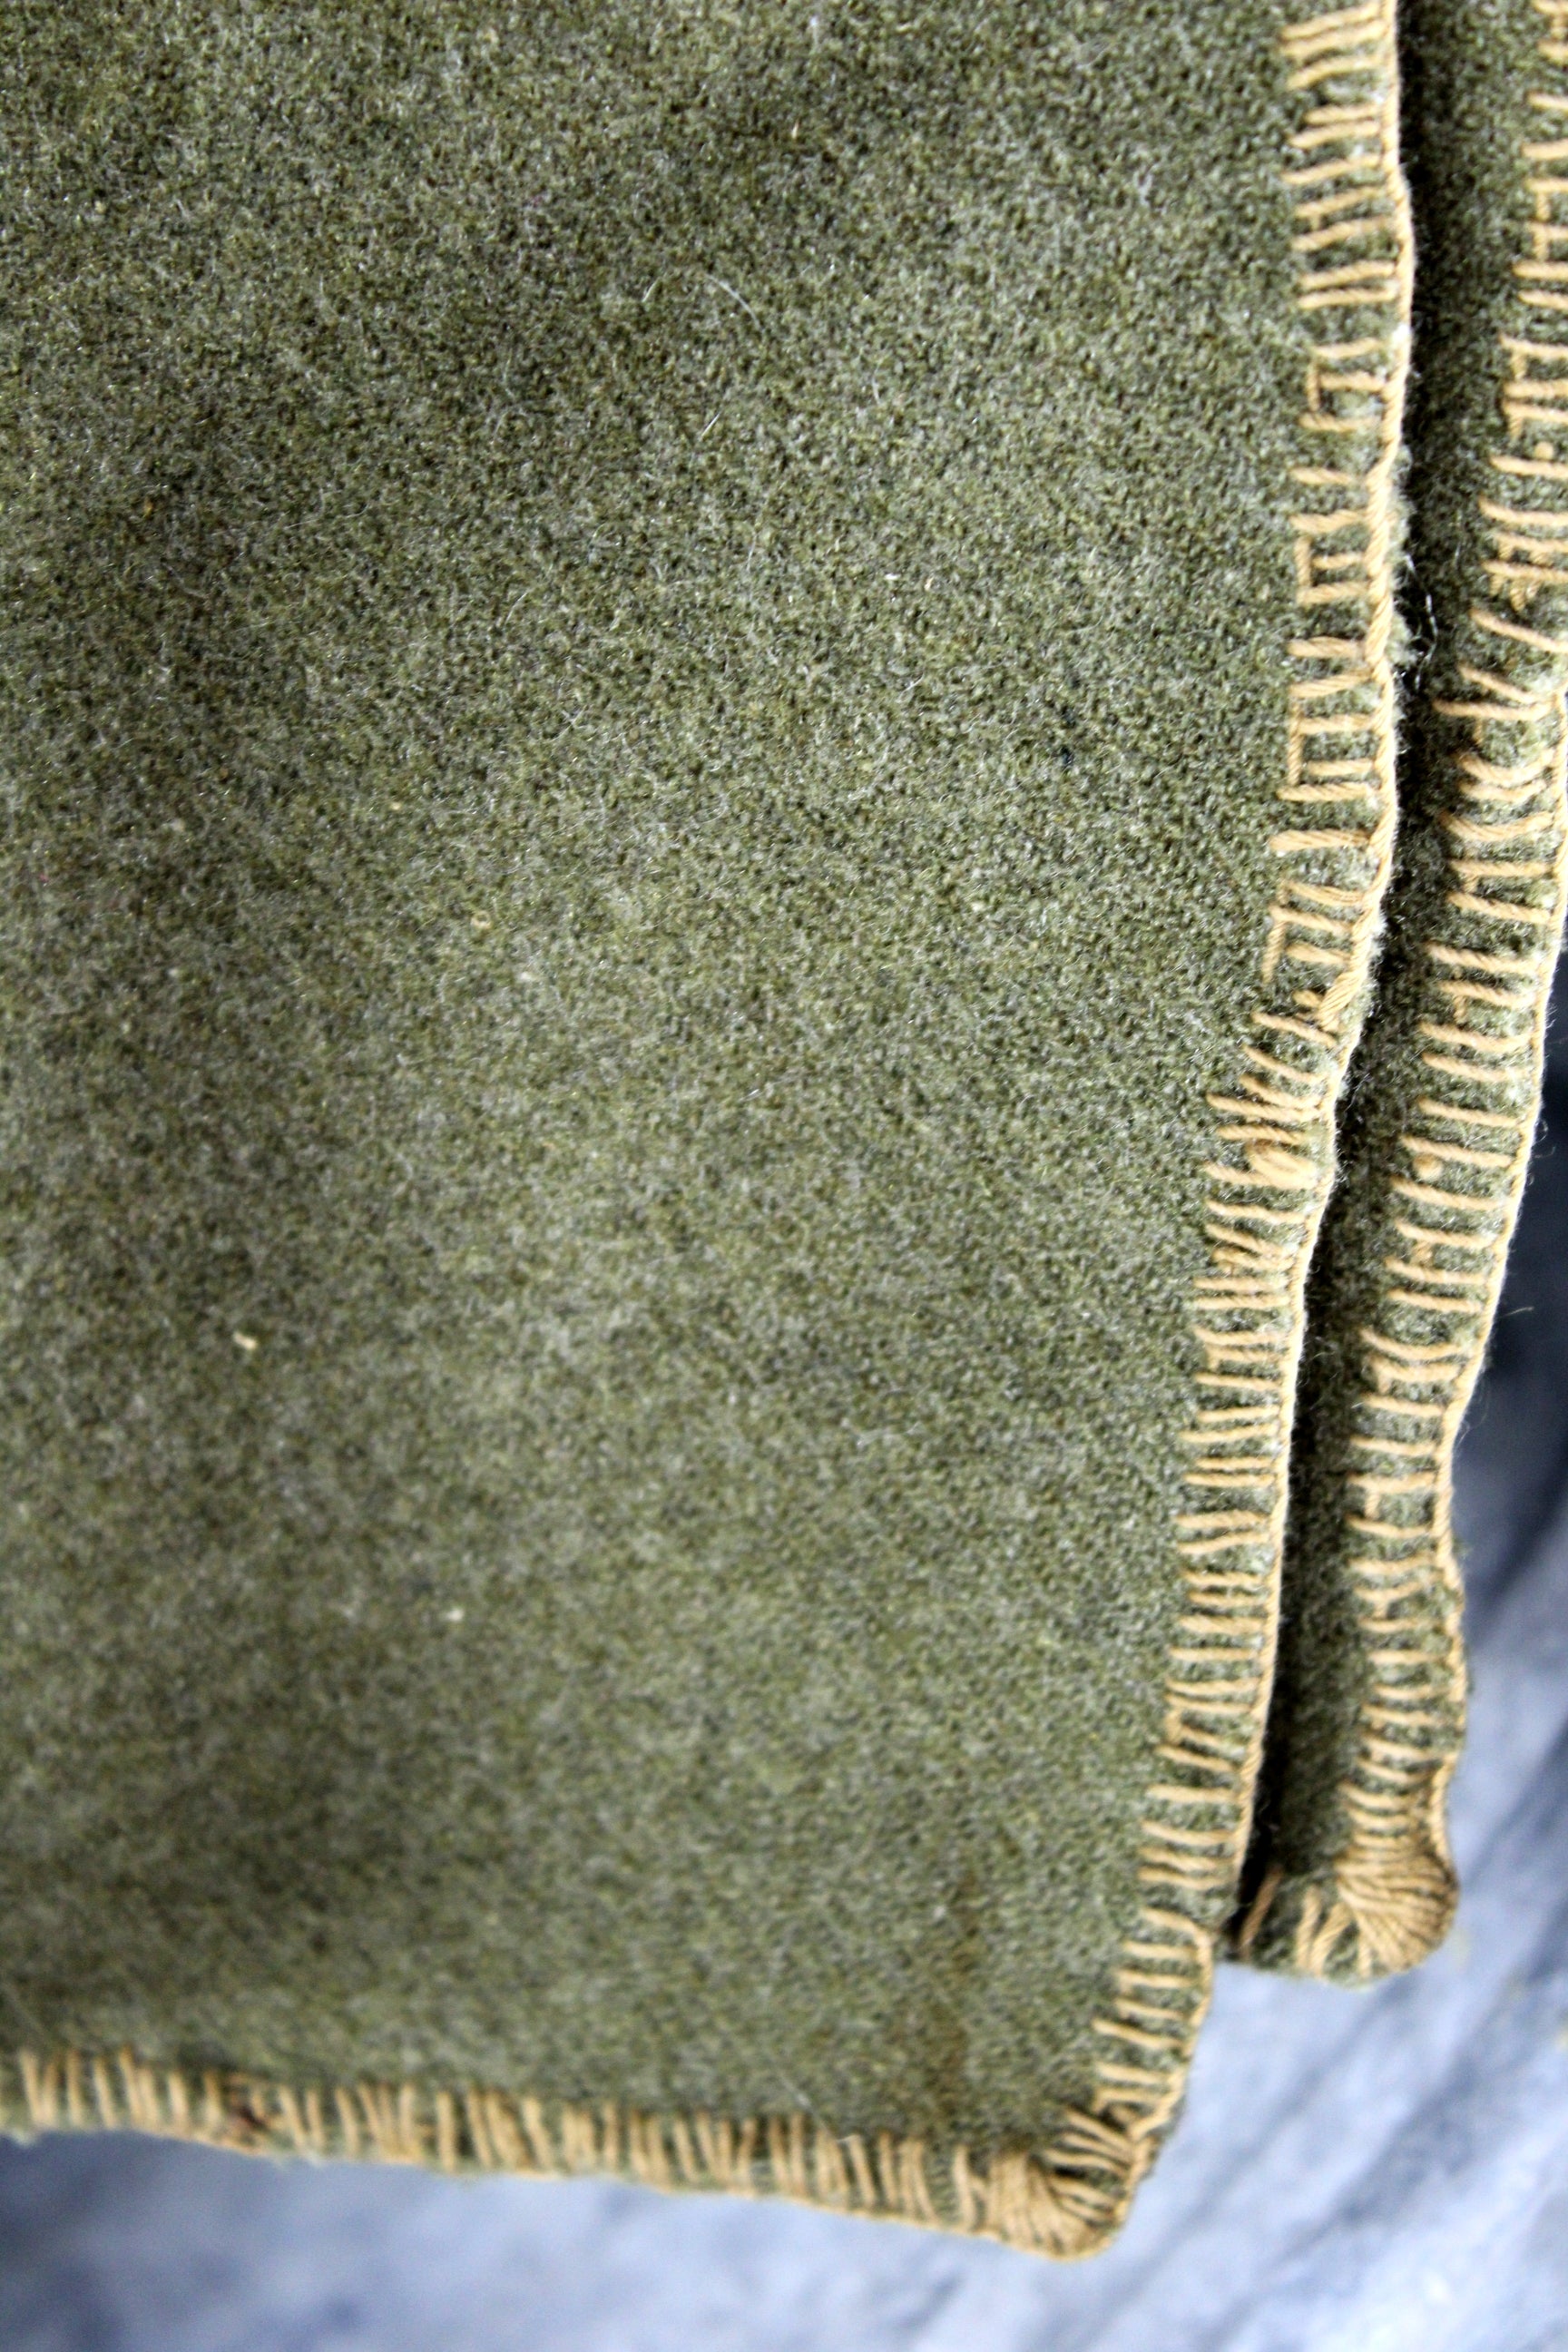 Military Wool Blanket - Estate Note marked WW1 ~ Olive Green - 55" X 74" stitched edges